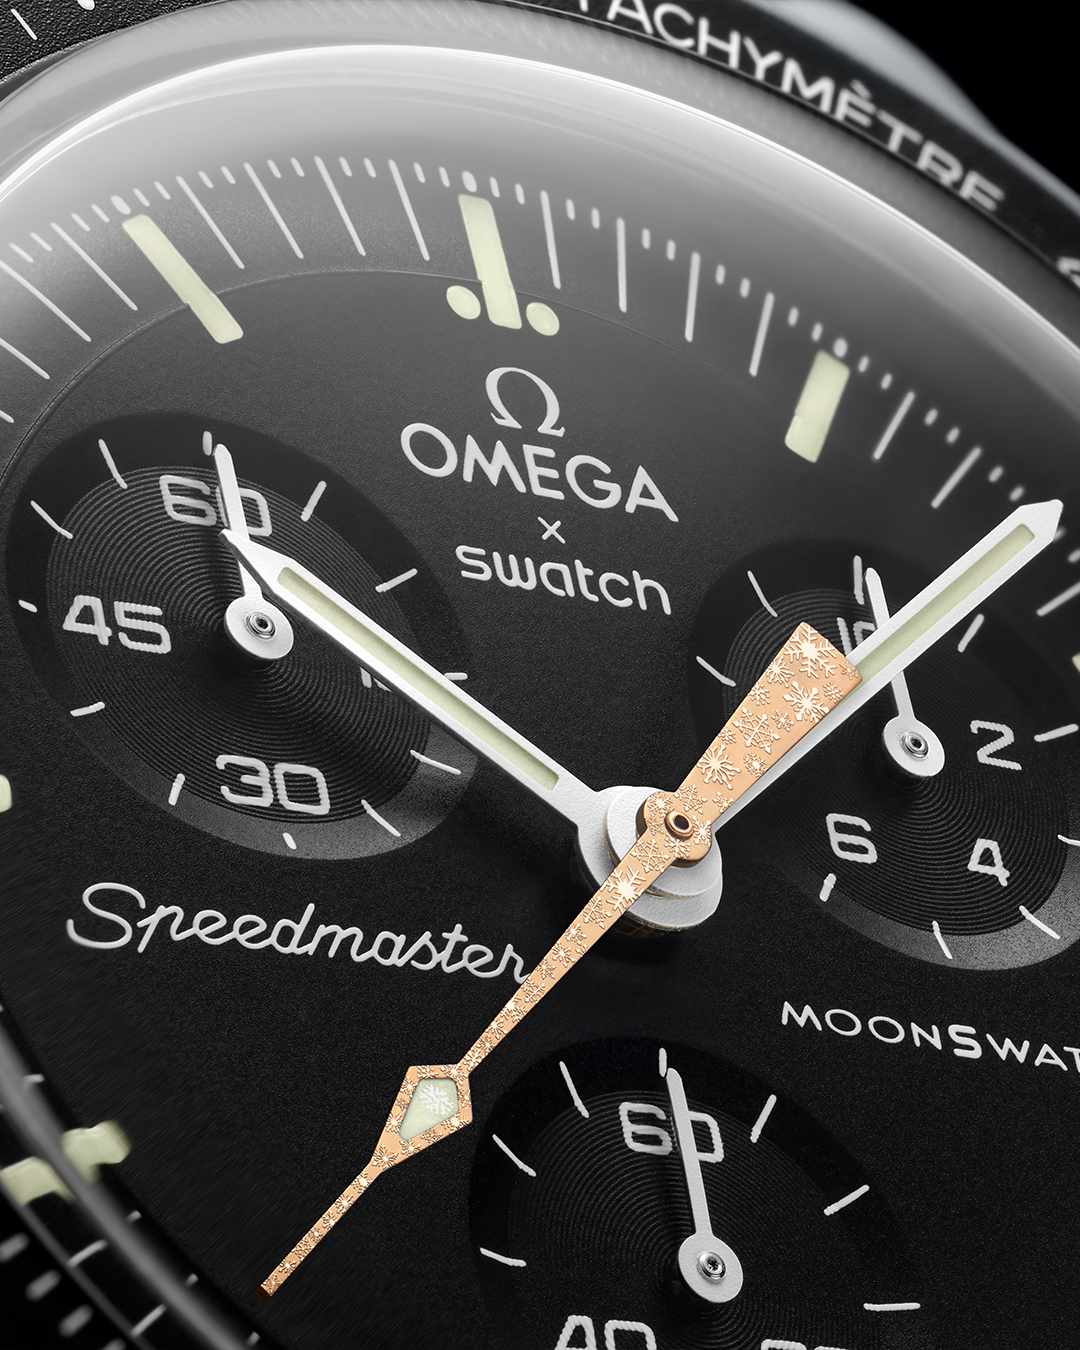 A close-up photo of OMEGA & Swatch's cold moon-inspired Moonswatch watch collab, showing a black watch face and gold hands with a snowflake pattern